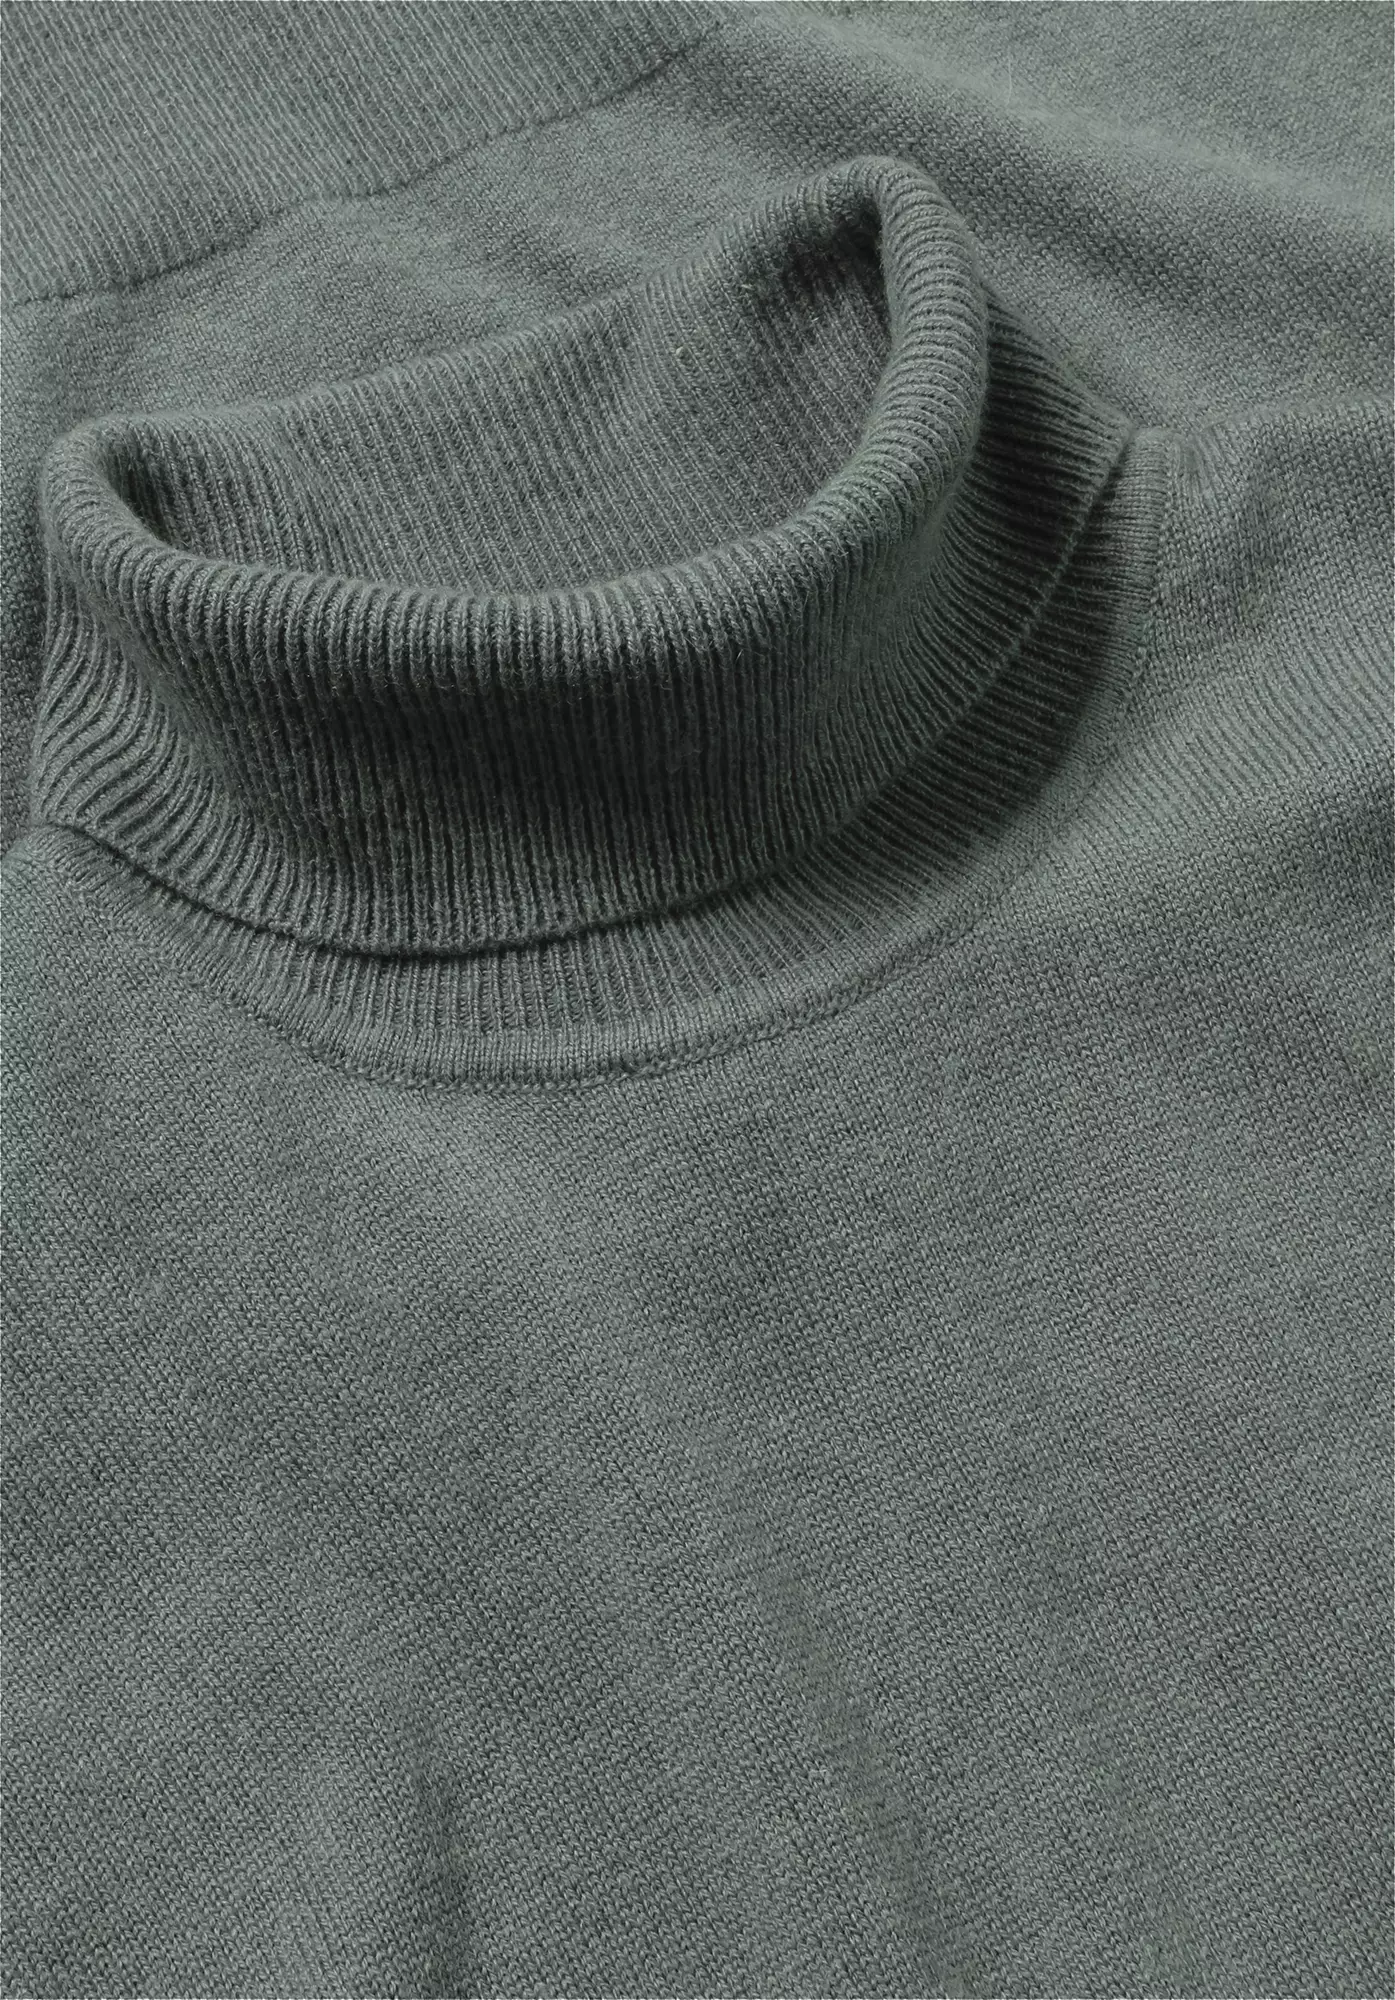 Turtleneck sweater made of virgin wool with cashmere 48904